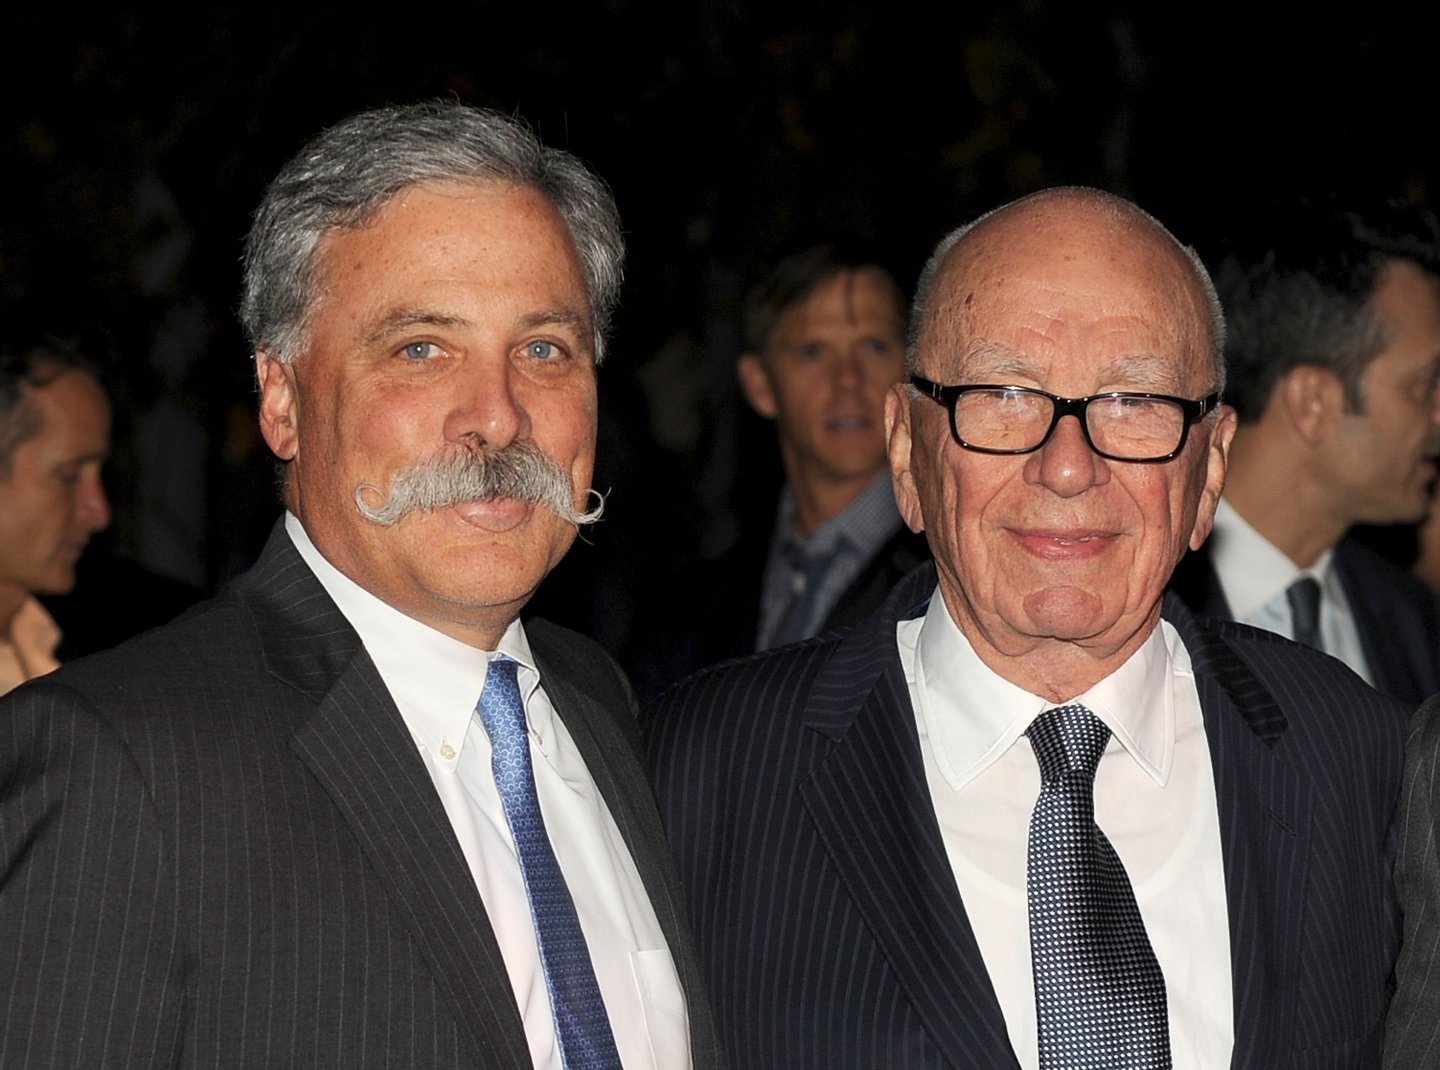 CENTURY CITY, CA - OCTOBER 16: President, Chief Operating Officer, and Deputy Chairman of News Corporation Chase Carey (L) and Chairman and CEO of News Corporation Rupert Murdoch attend The Paley Center for Media's 2013 benefit gala honoring FX Networks with the Paley Prize for Innovation & Excellence at Fox Studio Lot on October 16, 2013 in Century City, California. (Photo by Kevin Winter/Getty Images)